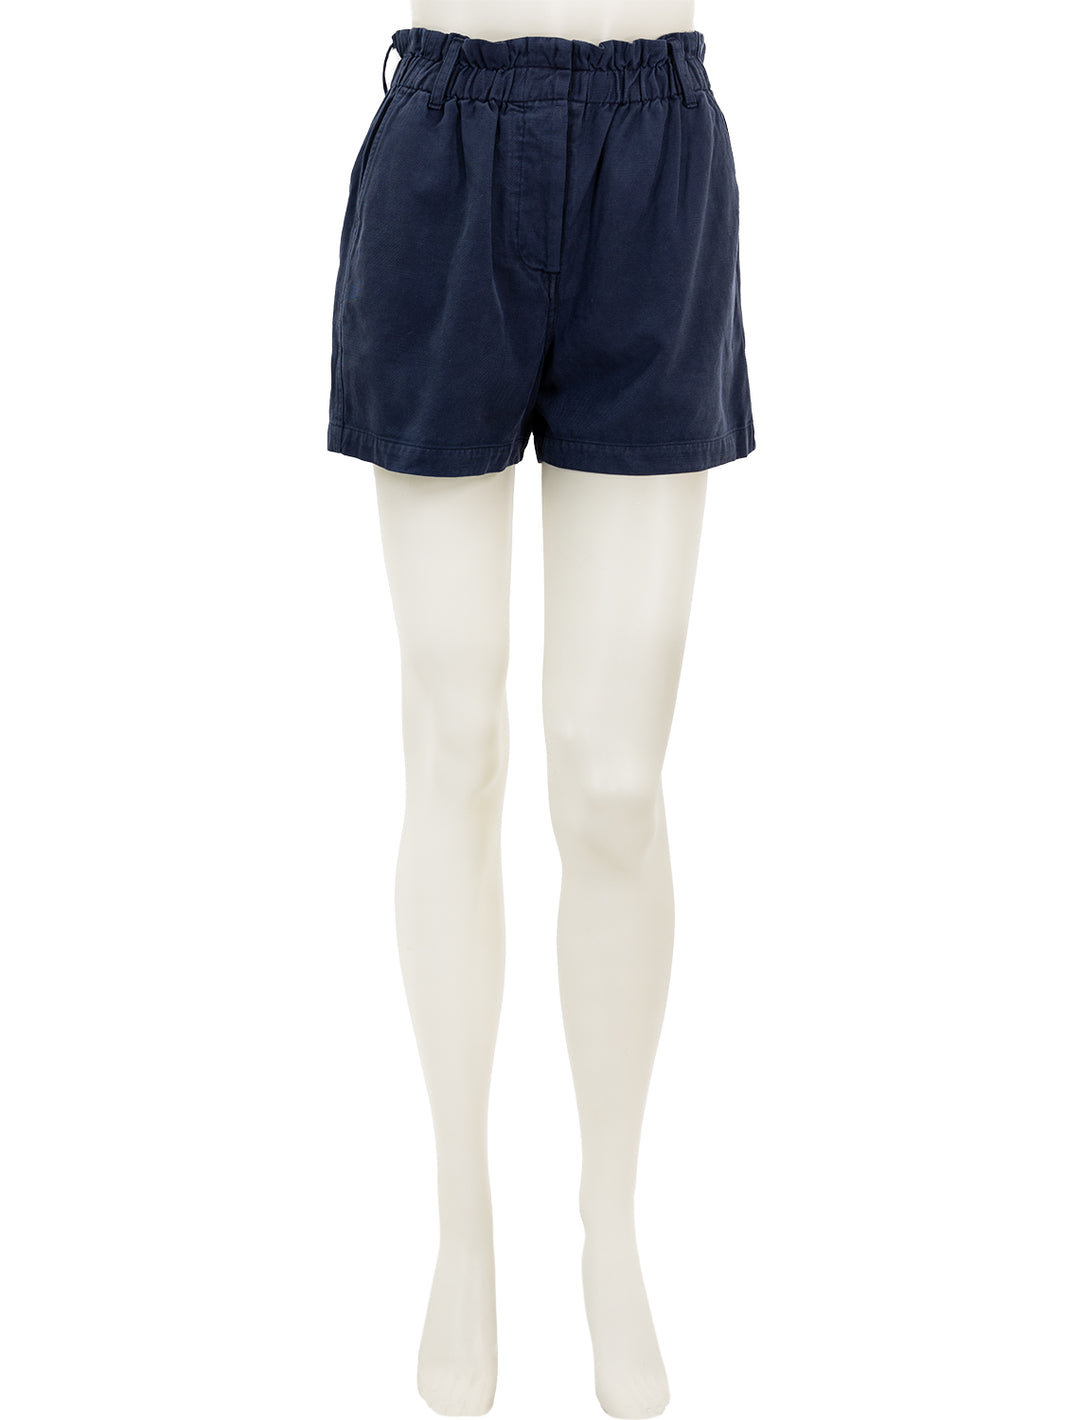 Front view of Rails' monte shorts in navy.